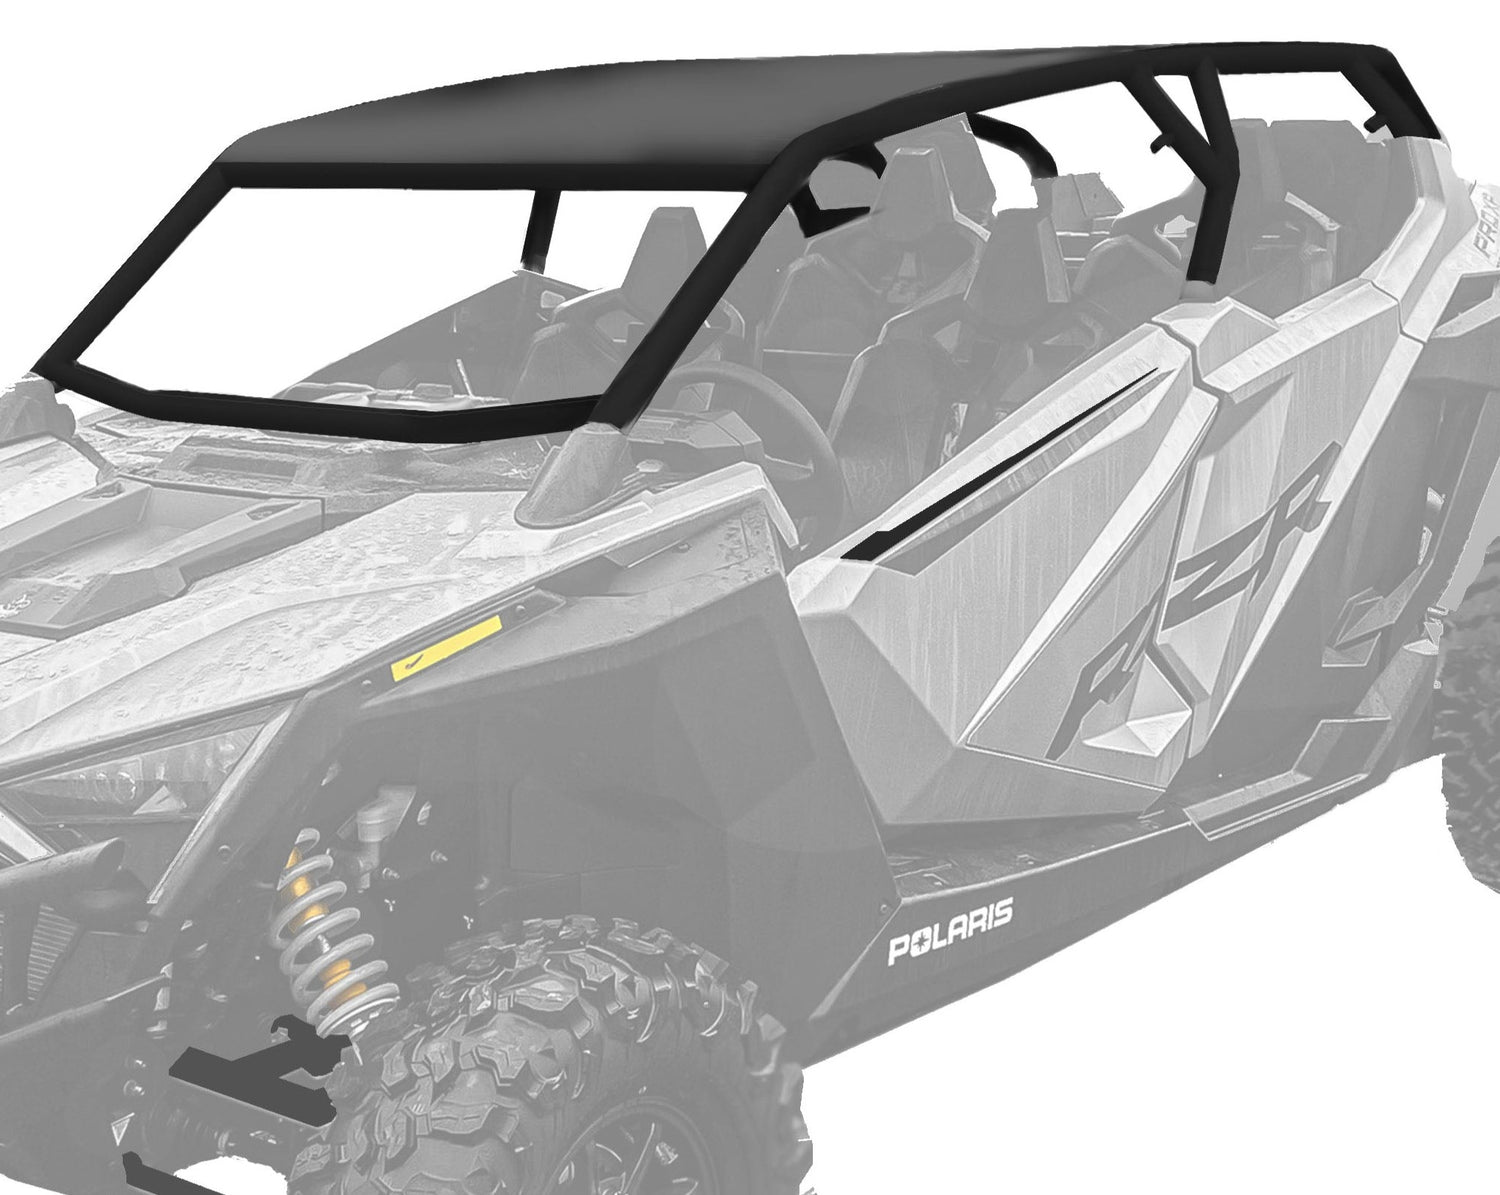 Upgrade Your Ride with Thumper Fab's Polaris RZR Cages